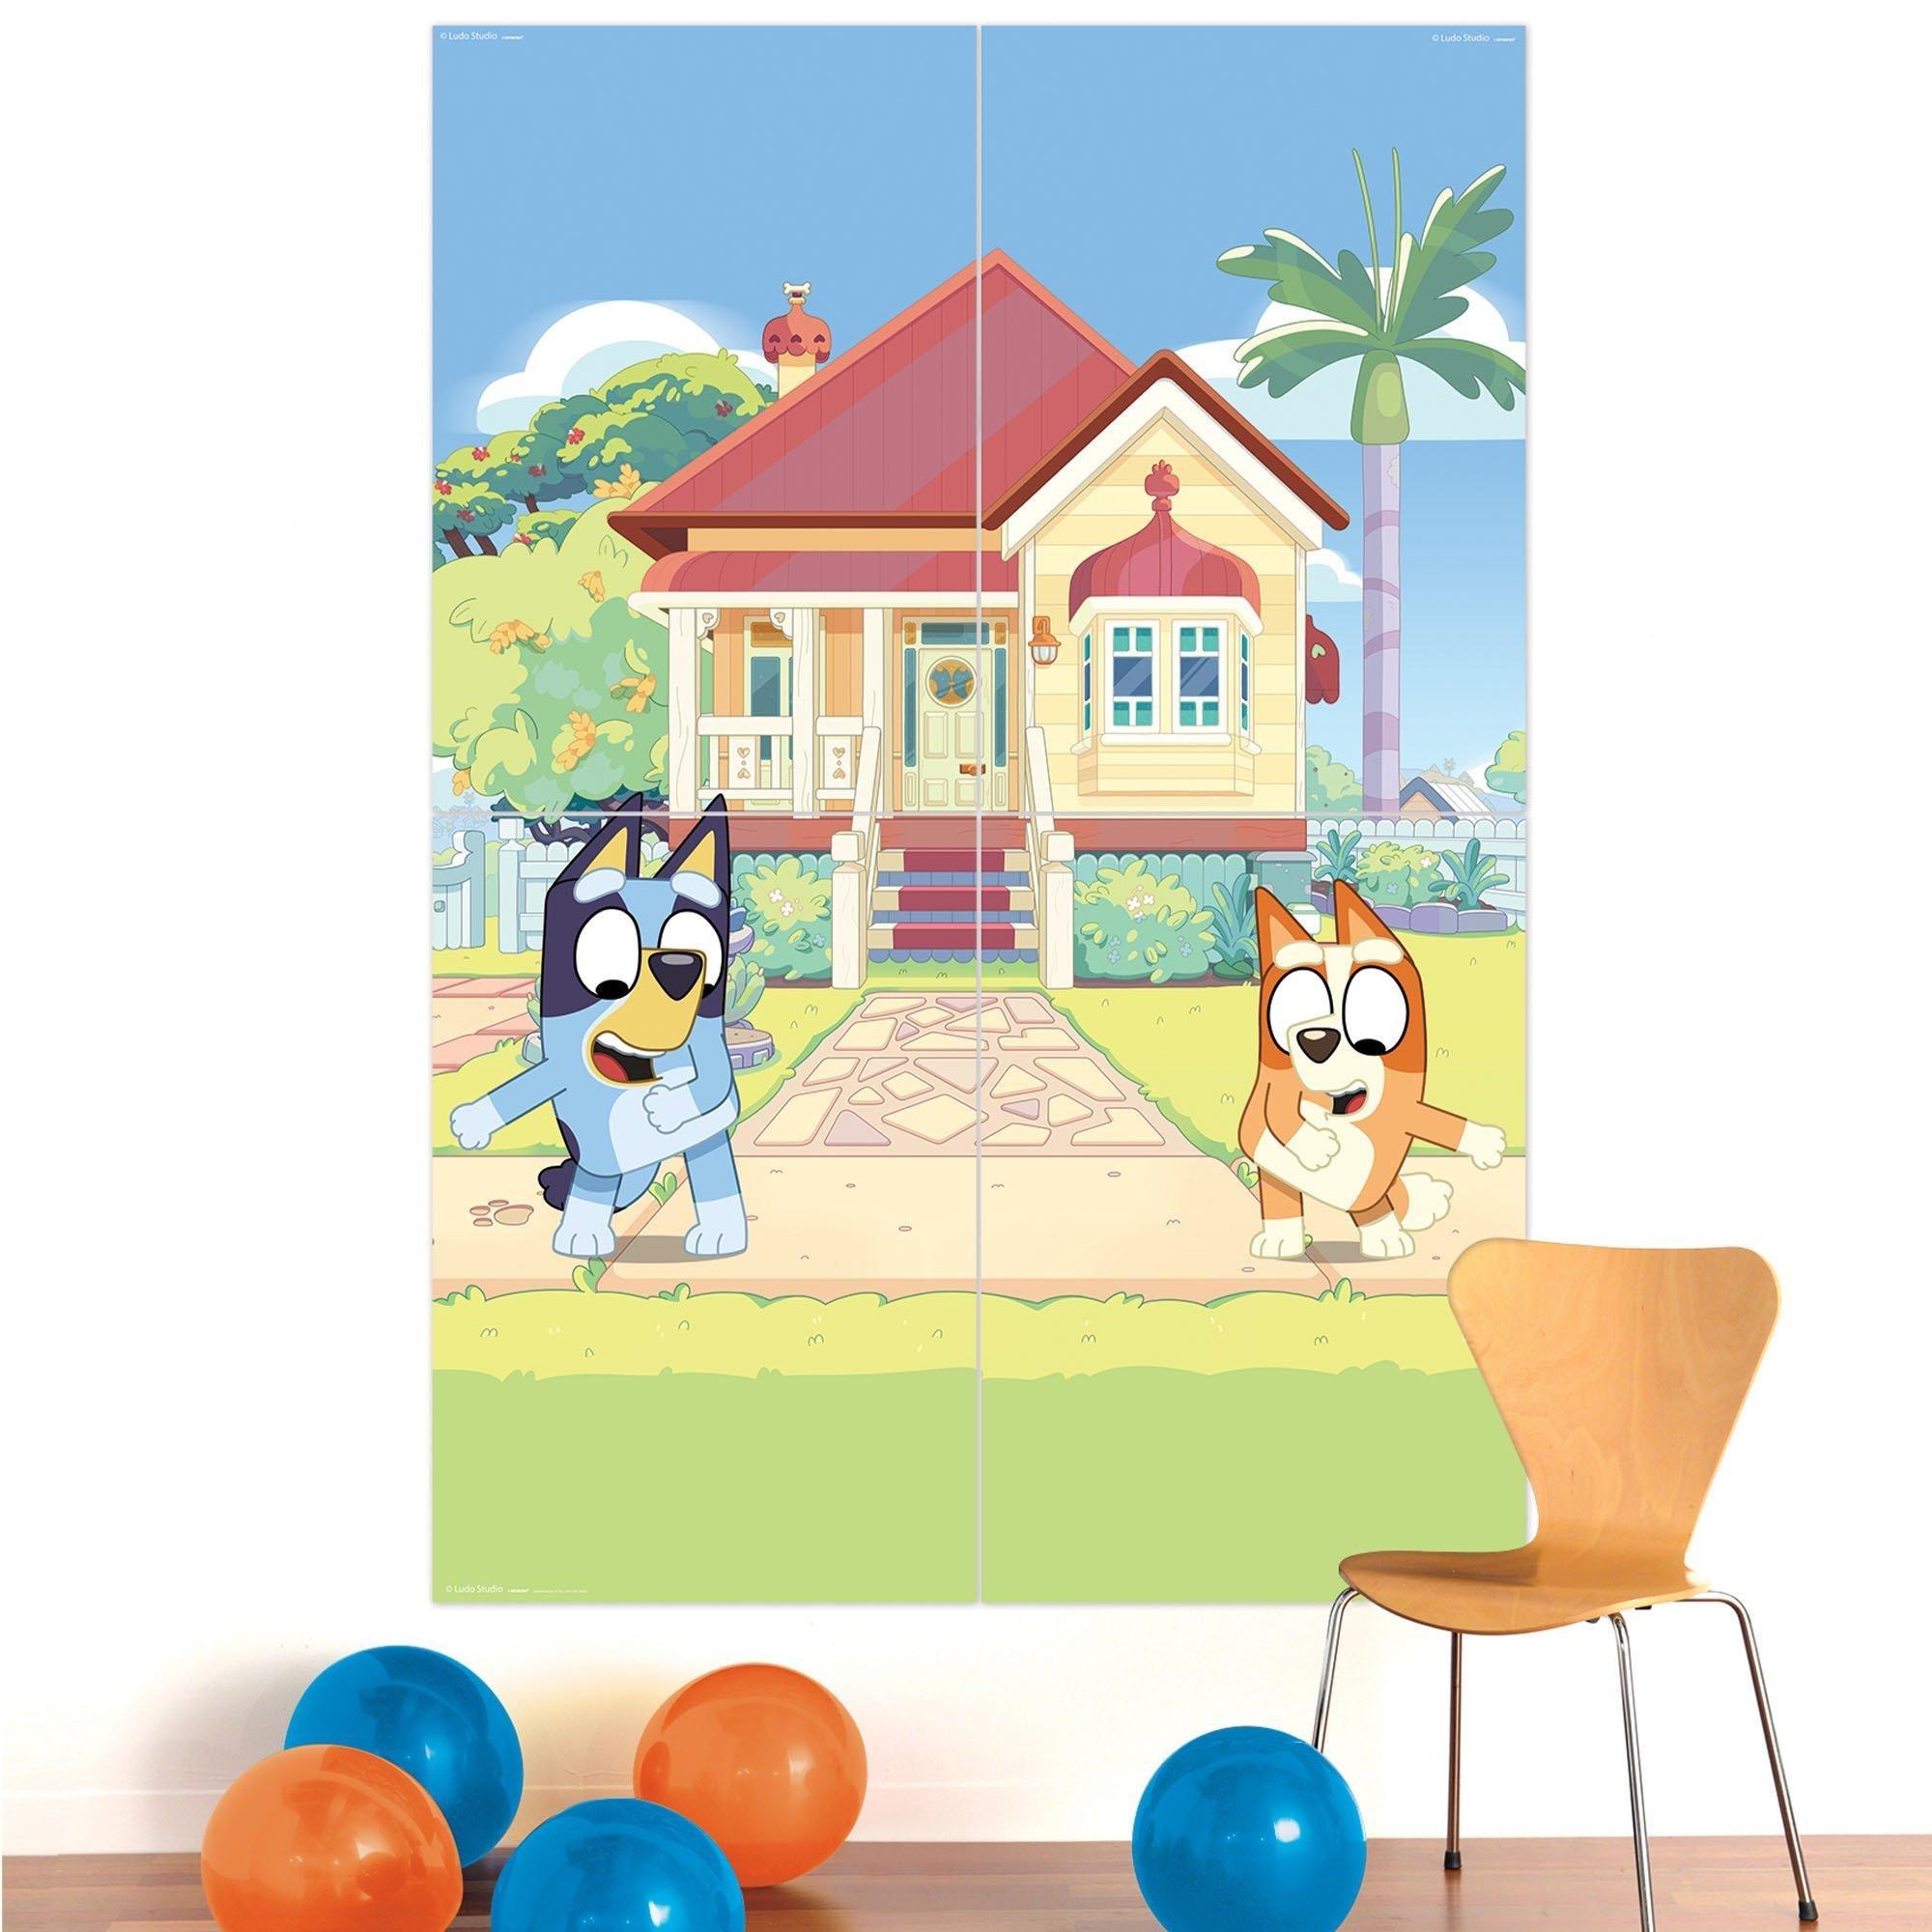 Bluey Party Decorating Supplies Pack - Kit Includes Themed Latex Balloons, Table Decorations, Candle, Swirls & Photo Booth Kit